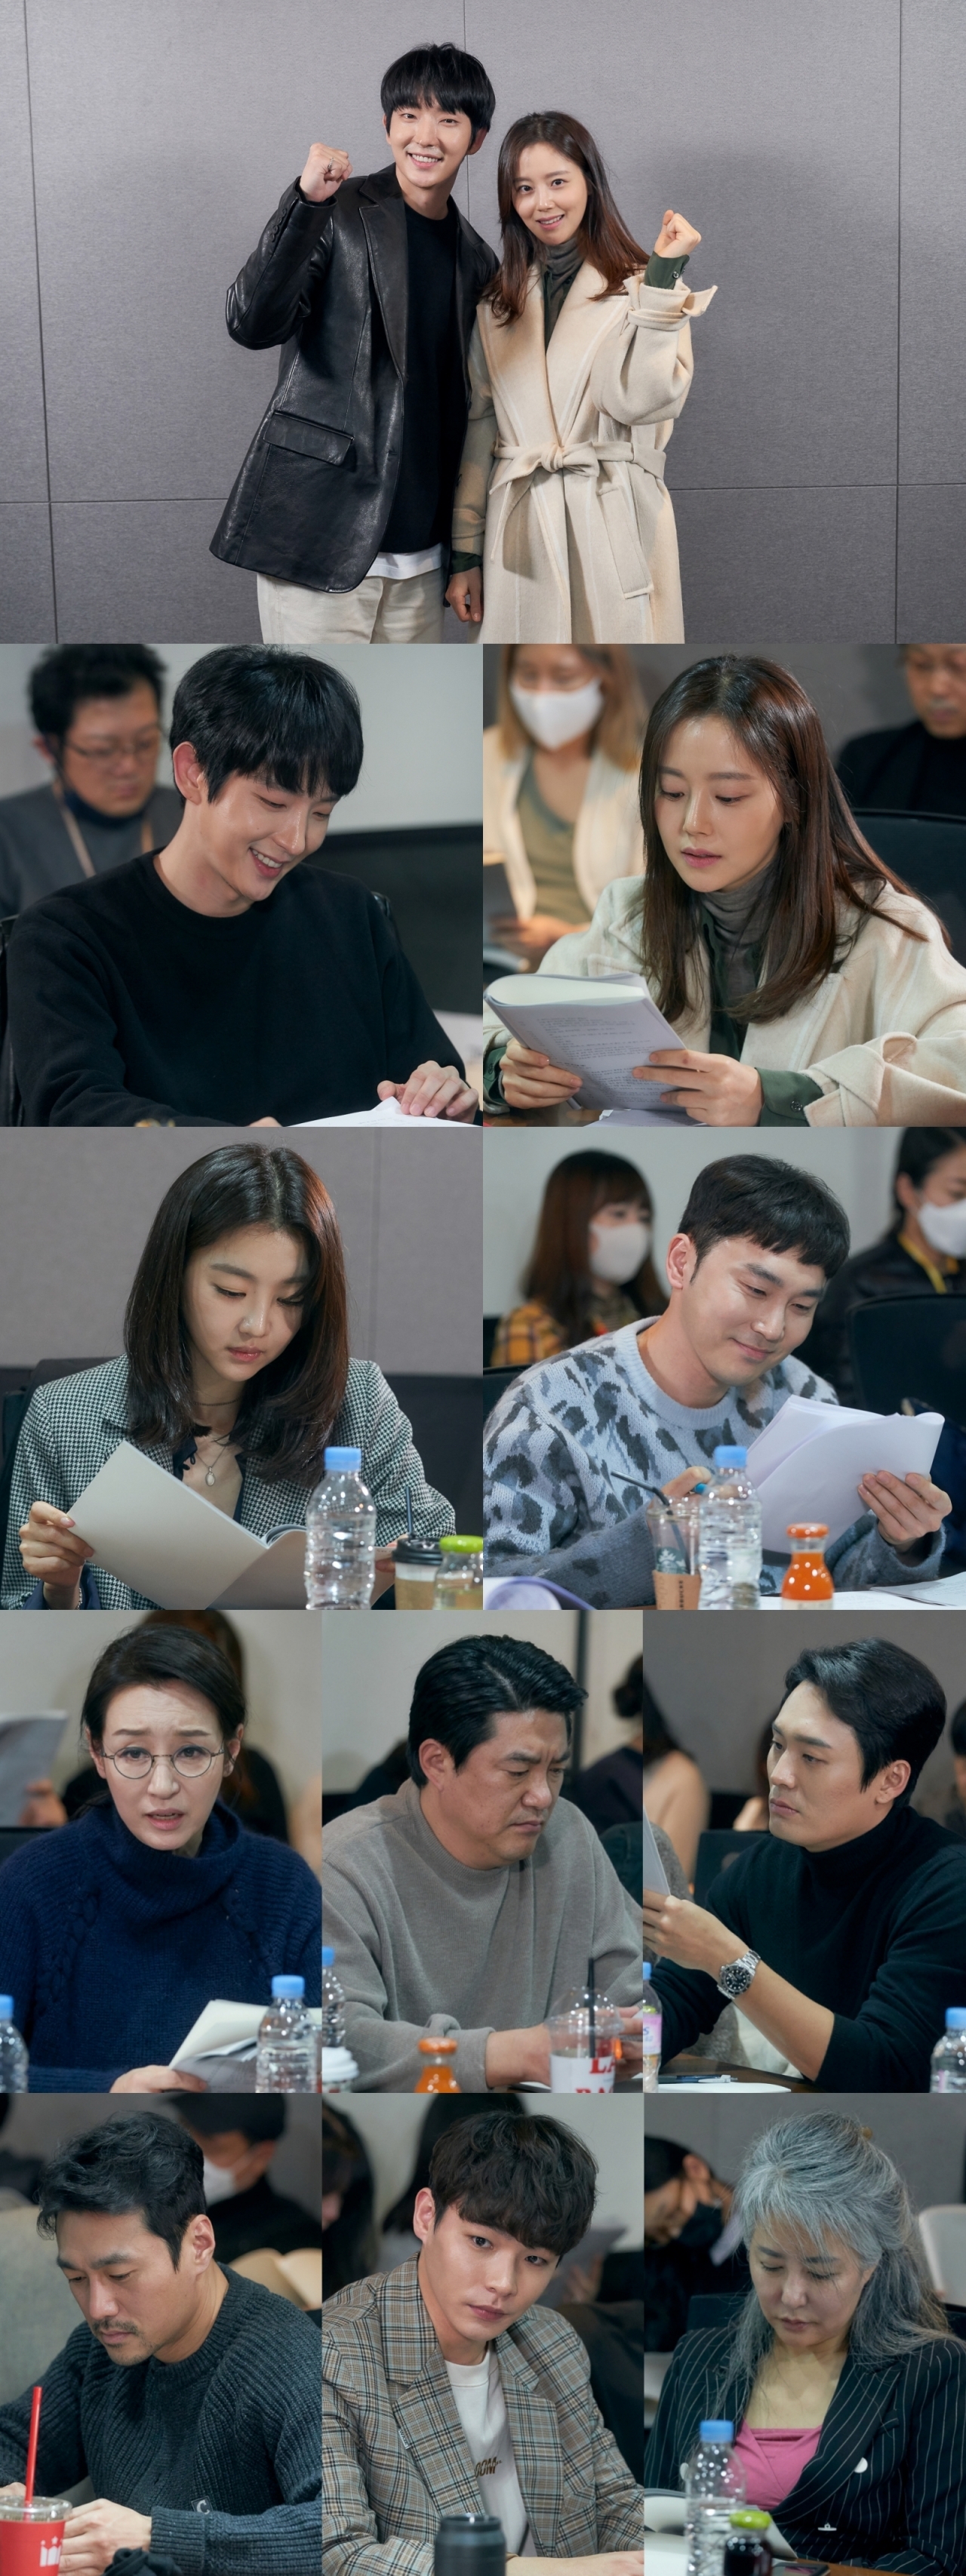 TVNs new tree drama The Flower of Evil (directed by Kim Cheol-gyu/playplayplayed by Yoo Jung-hee), which will be broadcast for the first time in July, is a high-density emotional tracking drama of two people who are behind the truth that they want to hide and change their identities, Baek Hee-sung (Lee Joon-gi), a homicide detective wife who tracks his past, and Cho Ji-won (Moon Chae-won), It is.What if your husband, who has loved you for 14 years, is a serial killer without blood or tears? throws a shocking topic.In the script reading scene, which announced the start of the full-scale voyage, director Kim Chul-gyu of the luxury directing between Melo and Thriller, writer Yoo Jung-hee, who is attracting attention with his solid writing power, Lee Joon-gi (played by Baek Hee-sung), Moon Chae-won (played by Cha Ji-won), Jang Hee-jin (played by Do Hae-su), and Seo Hyeon-woooo Actors, who believed in Oh (played by Kim Moo-jin) as the main axis, were all out and joined together.Lee Joon-gi said, I want to leave it as a work that will be remembered for a long time for viewers. Moon Chae-won also expressed his enthusiasm that he would do his best to show good acting as he met good works.Actors, who exchanged greetings in a cheerful atmosphere, began to play a good role in the role of each actor in a short time when the reading began, and began to play a flower of evil with a hot performance that filled the dialogue and emotions that exchanged like ping-pong.Lee Joon-gi, who was divided into Baek Hee-sung, a man who hid the past like a time bomb in the play, and even loved it, completed the breathtaking tightrope of the extreme, and Moon Chae-won showed a different act of acting with the double charm of his loving wife and charismatic powerful Detective.Above all, if the two melodramatic couple Chemie made the scene hot, the delicate Acting, which is suspicious of each other, filled the scene with breathtaking tension.In this way, the Flower of Evil, which is expected to be an ensemble of four leading characters, will be immersed by Actors, who are not too much of a luxury actor modifier such as Kim Ji-hoon, Choi Byung-mo, Son Jong-hak, Nam Ki-ae and Yoon Byung-hee, who have a changing spectrum of Acting.It is said that the production teams ambitious aspiration to make it impossible to let go of the tension as the additional impact figures continue to appear until the middle and late.In addition, the four-color, four-color, four-color, three-color, four-color, three-color, three-color, three-color, three-color, three-color, three-color, three-color, three-color, three-color, three-color, three-color, three-color, three-color, three-color, three-color, three-color, three-color, three-color, three-color, three-color, three-color, three-color, three-color, three-color, three-color, four-color, four-color, four-color, four-color, three-color, three-color,As such, Lee Joon-gi, Moon Chae-won, Jang Hee-jin, Seo Hyeon-woooooo, and the Flower of Evil, which predicts the perfect synergy of 